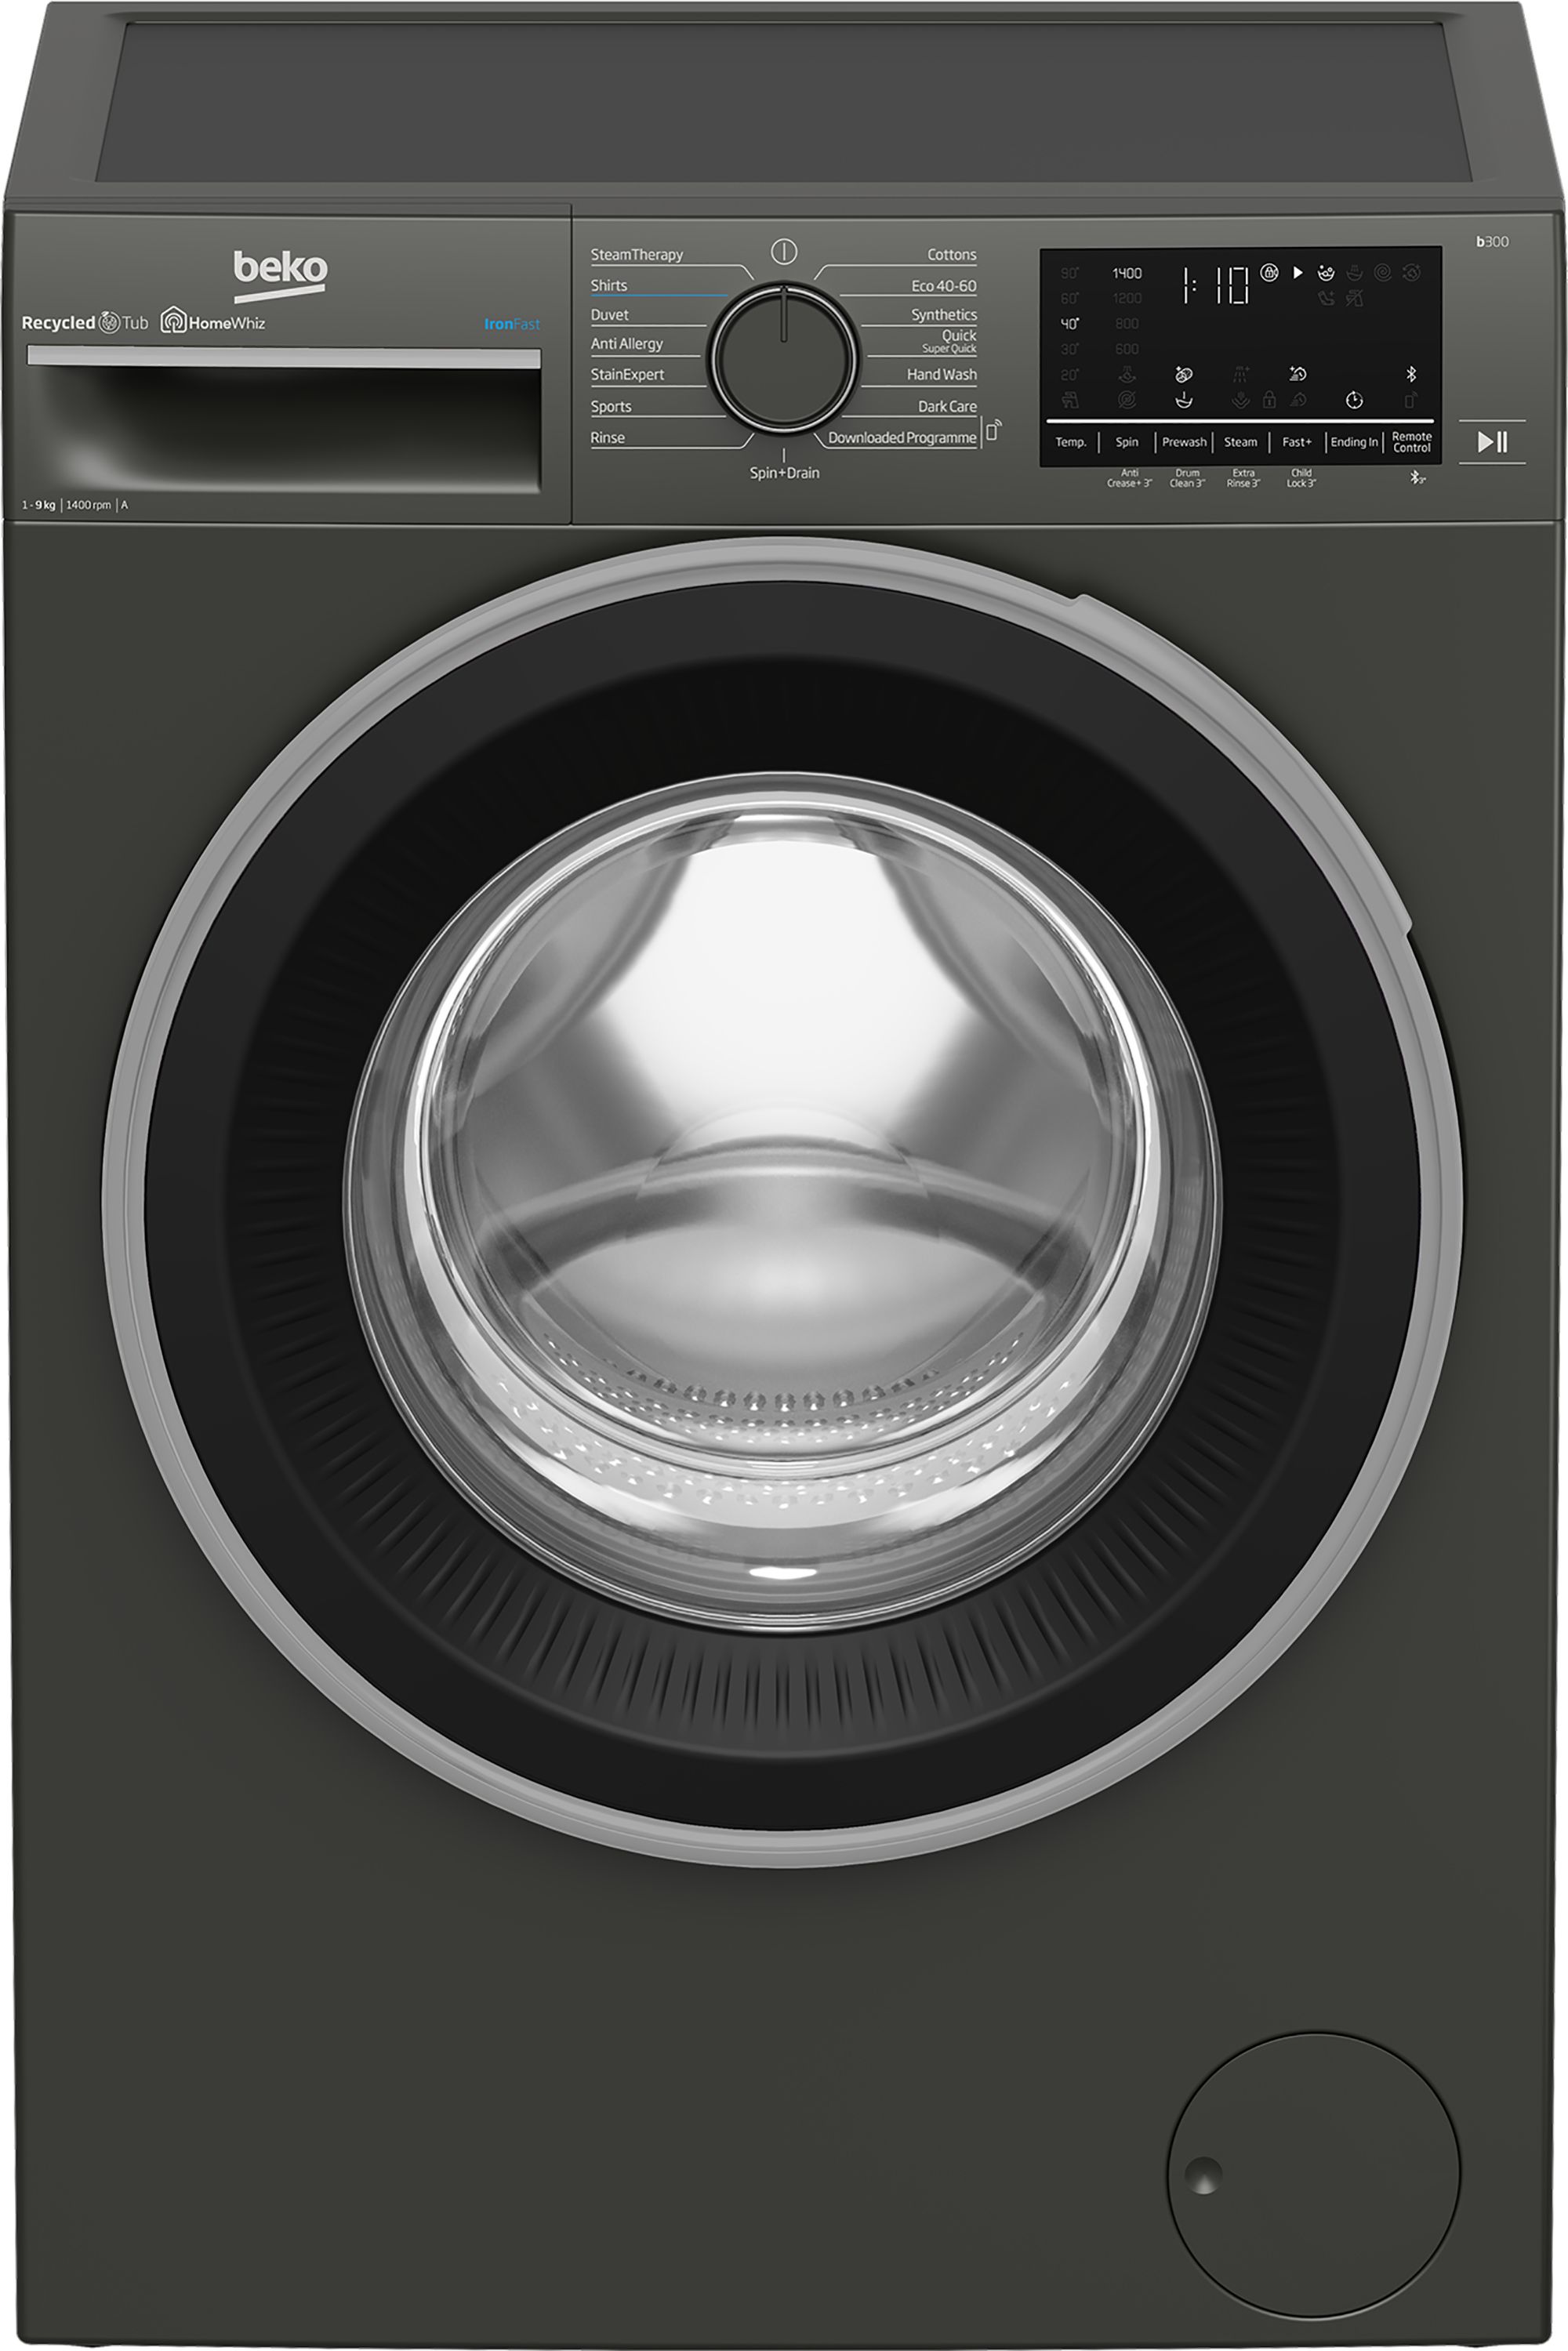 Beko IronFast RecycledTub B3W5941IG 9kg Washing Machine with 1400 rpm - Graphite - A Rated, Silver